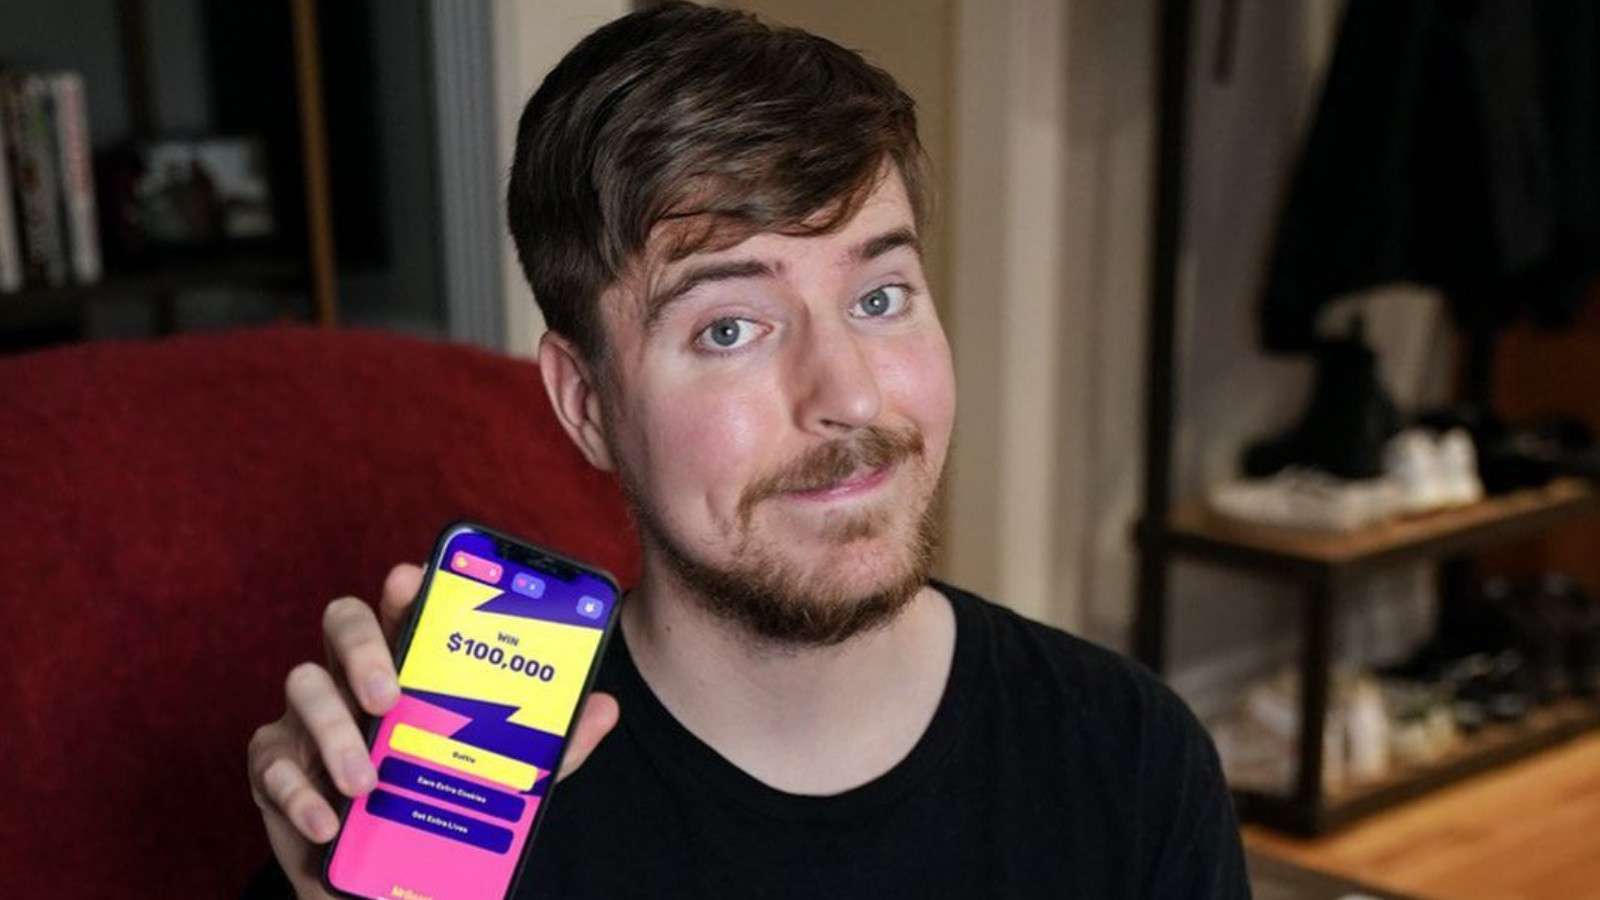 Mr Beast shows off his phone